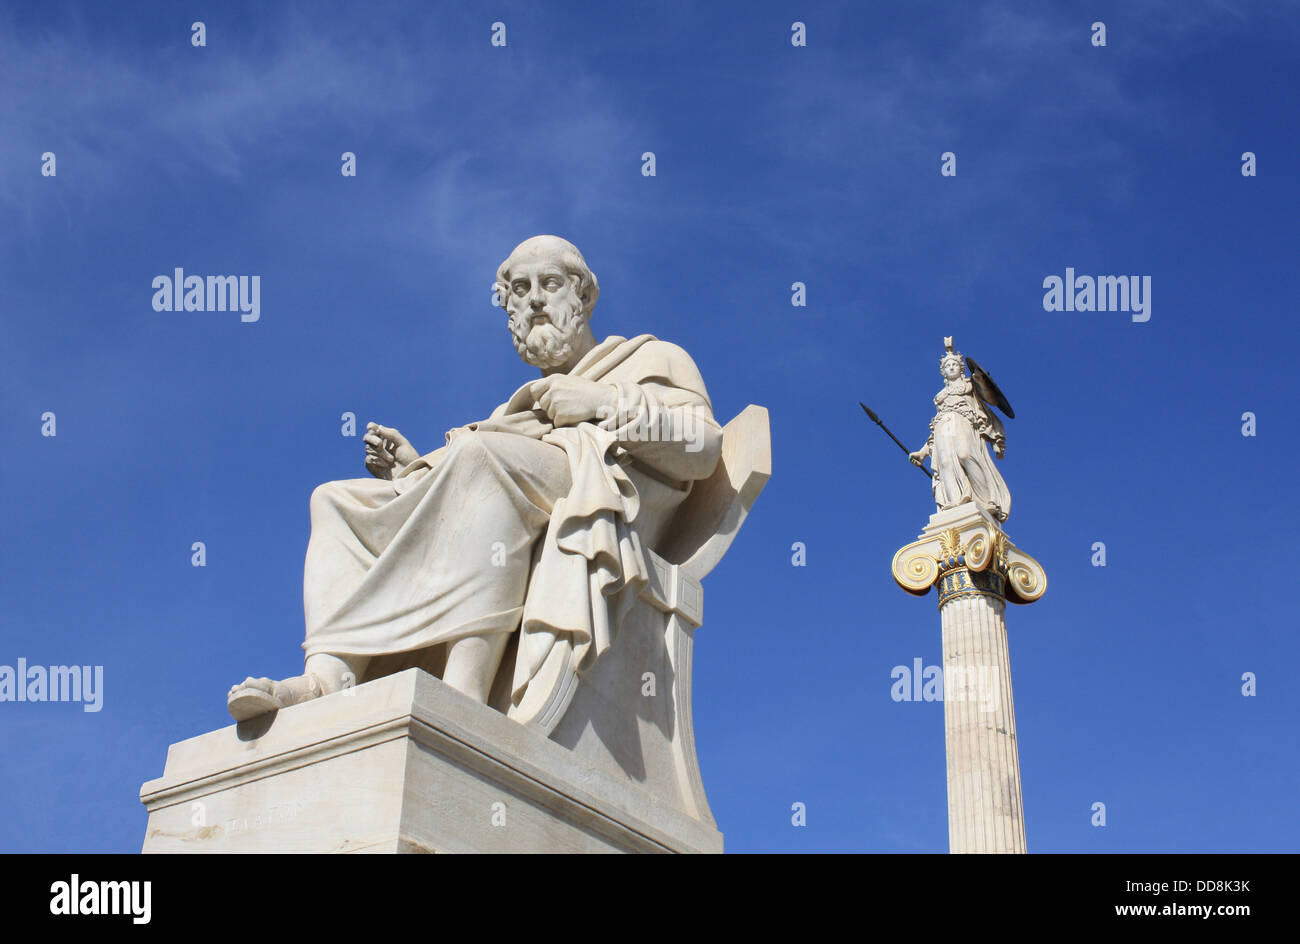 Statues of Plato and Athena in Athens, Greece Stock Photo